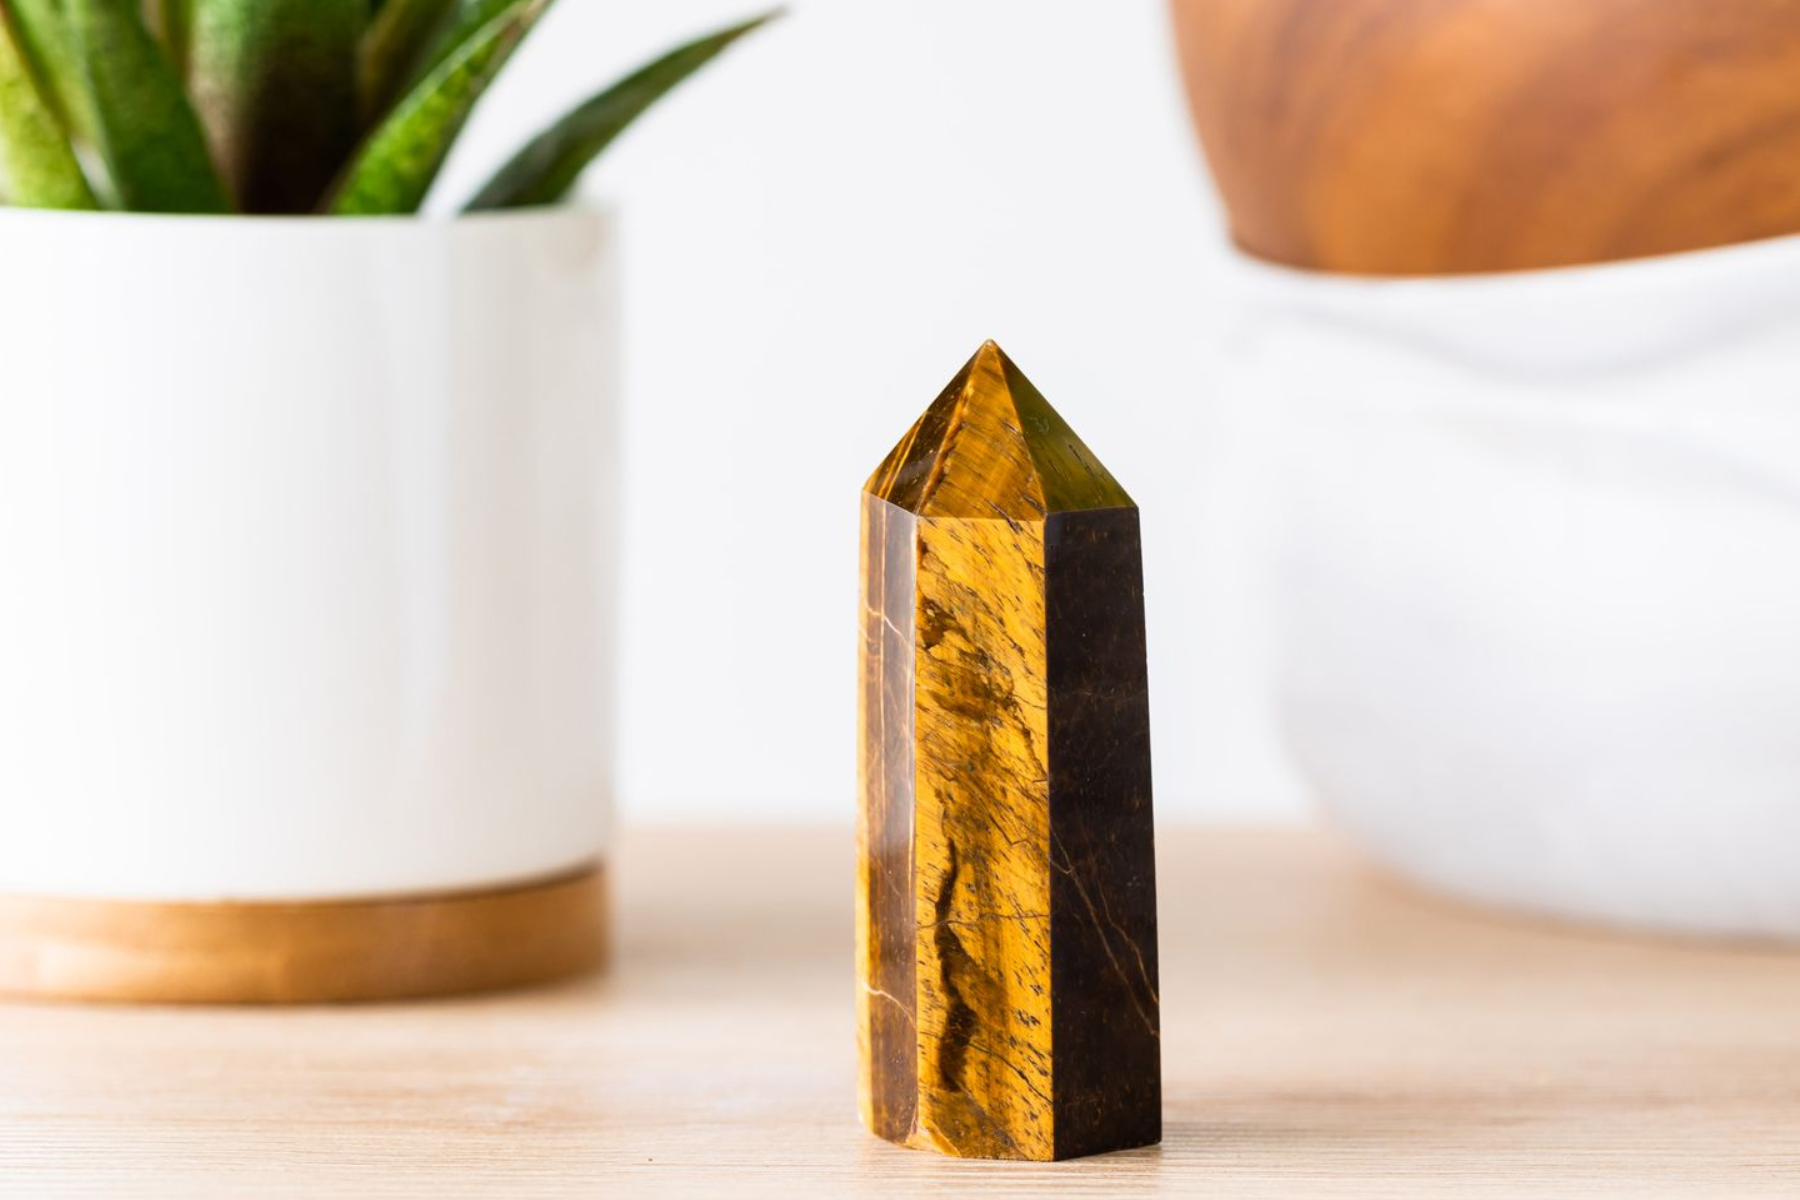 On the table, a Tiger's eye gemstone is surrounded by plants